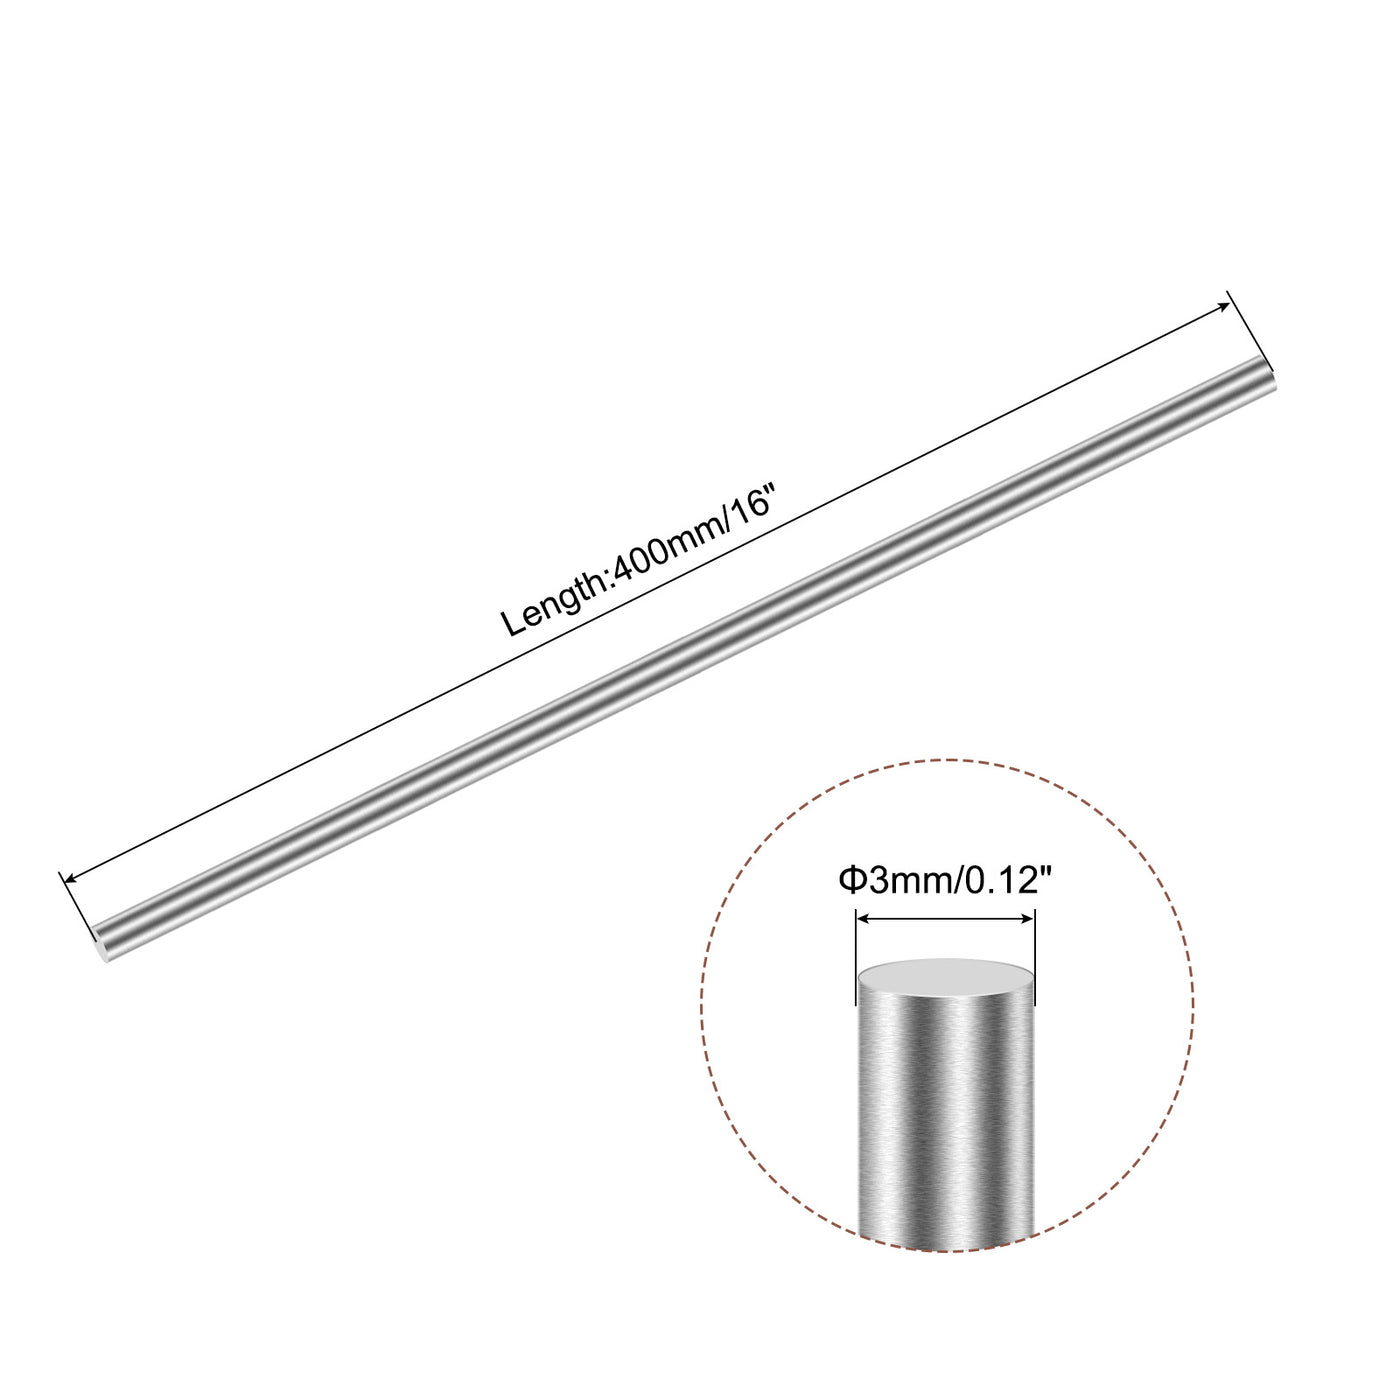 uxcell Uxcell 3mm x 400mm(1/8" x 16") 304 Stainless Steel Solid Round Rod for DIY Craft - 6pcs